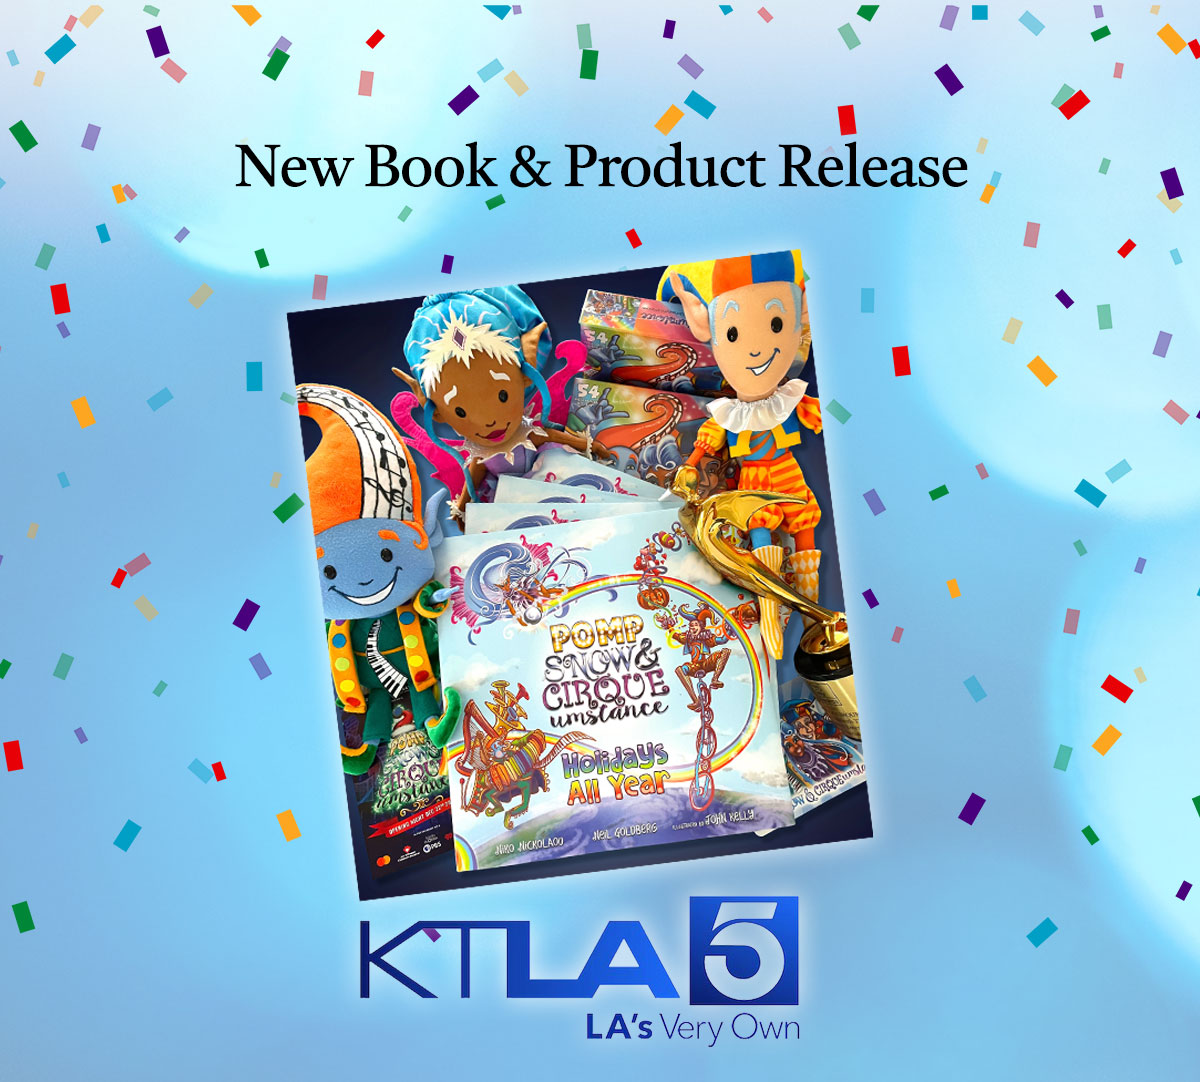 New Book & Product Release • News